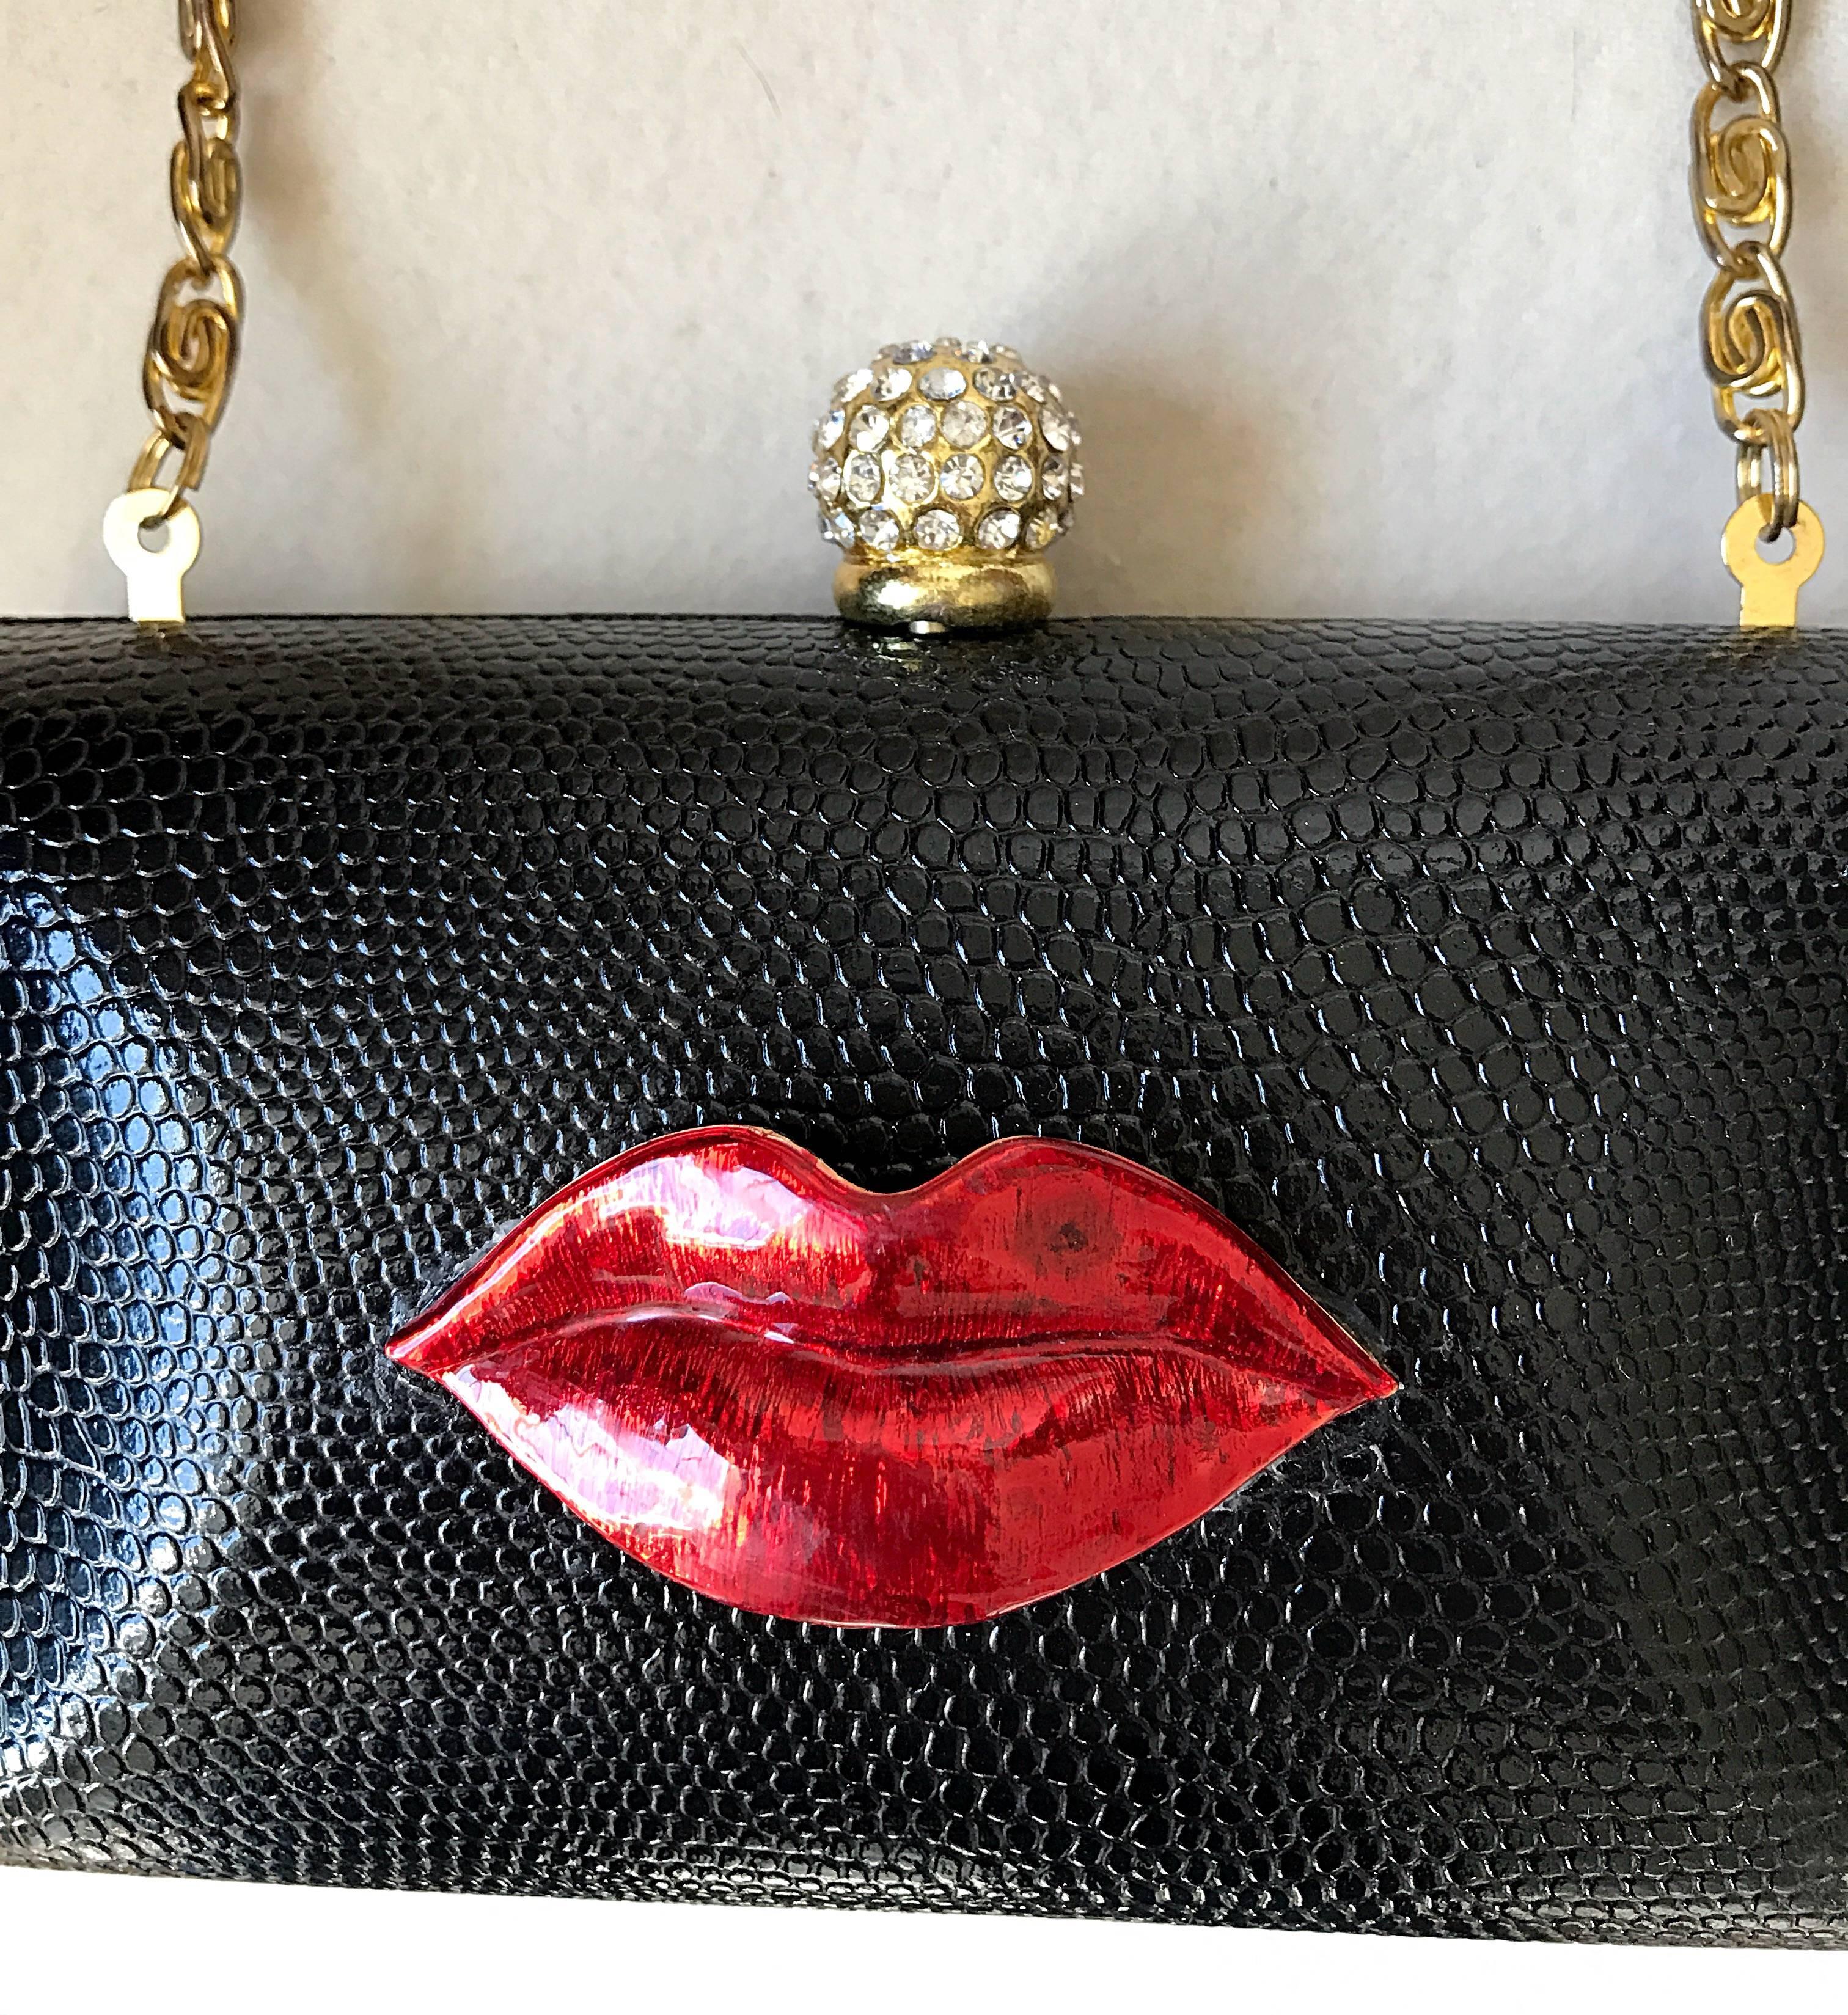 Super rare 1990s IRIS LANE Valentine Day vintage black and red lizard embossed leather minaudière convertible clutch! Features an allover black embossed tejus lizard leather body, with an attached lip 'KISS' lipstick red enamel appliqué. Perfect for